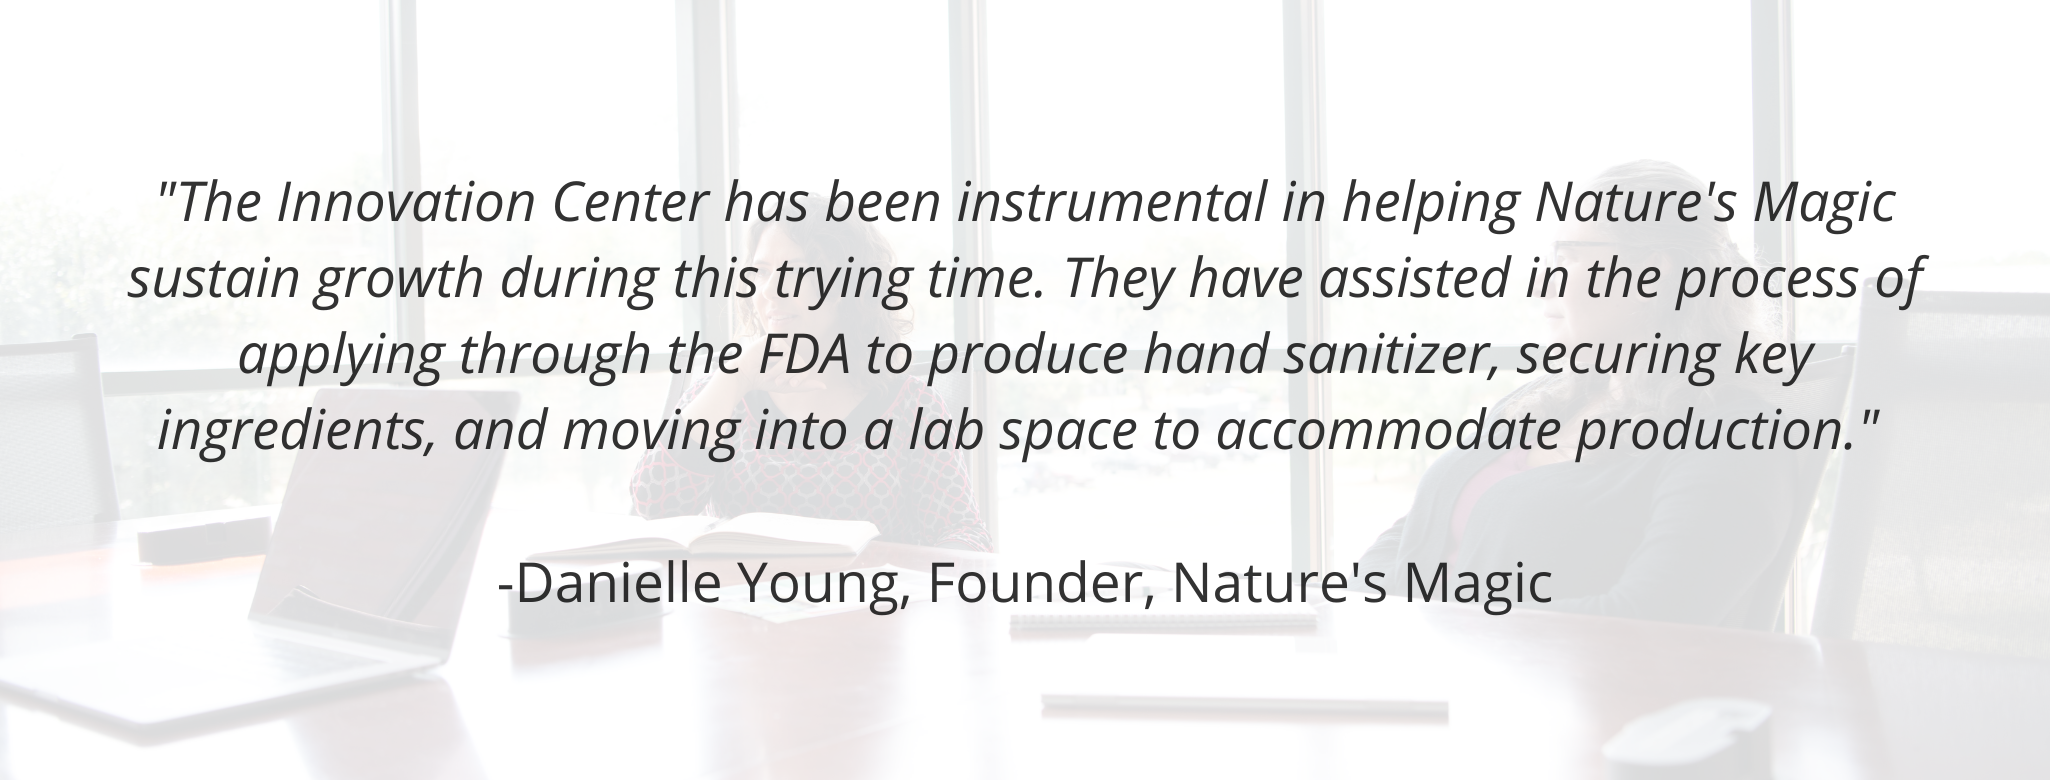 "The Innovation Center has been instrumental in helping Nature's Magic sustain growth during this trying time. They have assisted in the process of applying through the FDA to produce hand sanitizer, securing key ingredients, and moving into a lab space to accommodate production."  - Danielle Young, Founder, Nature's Magic